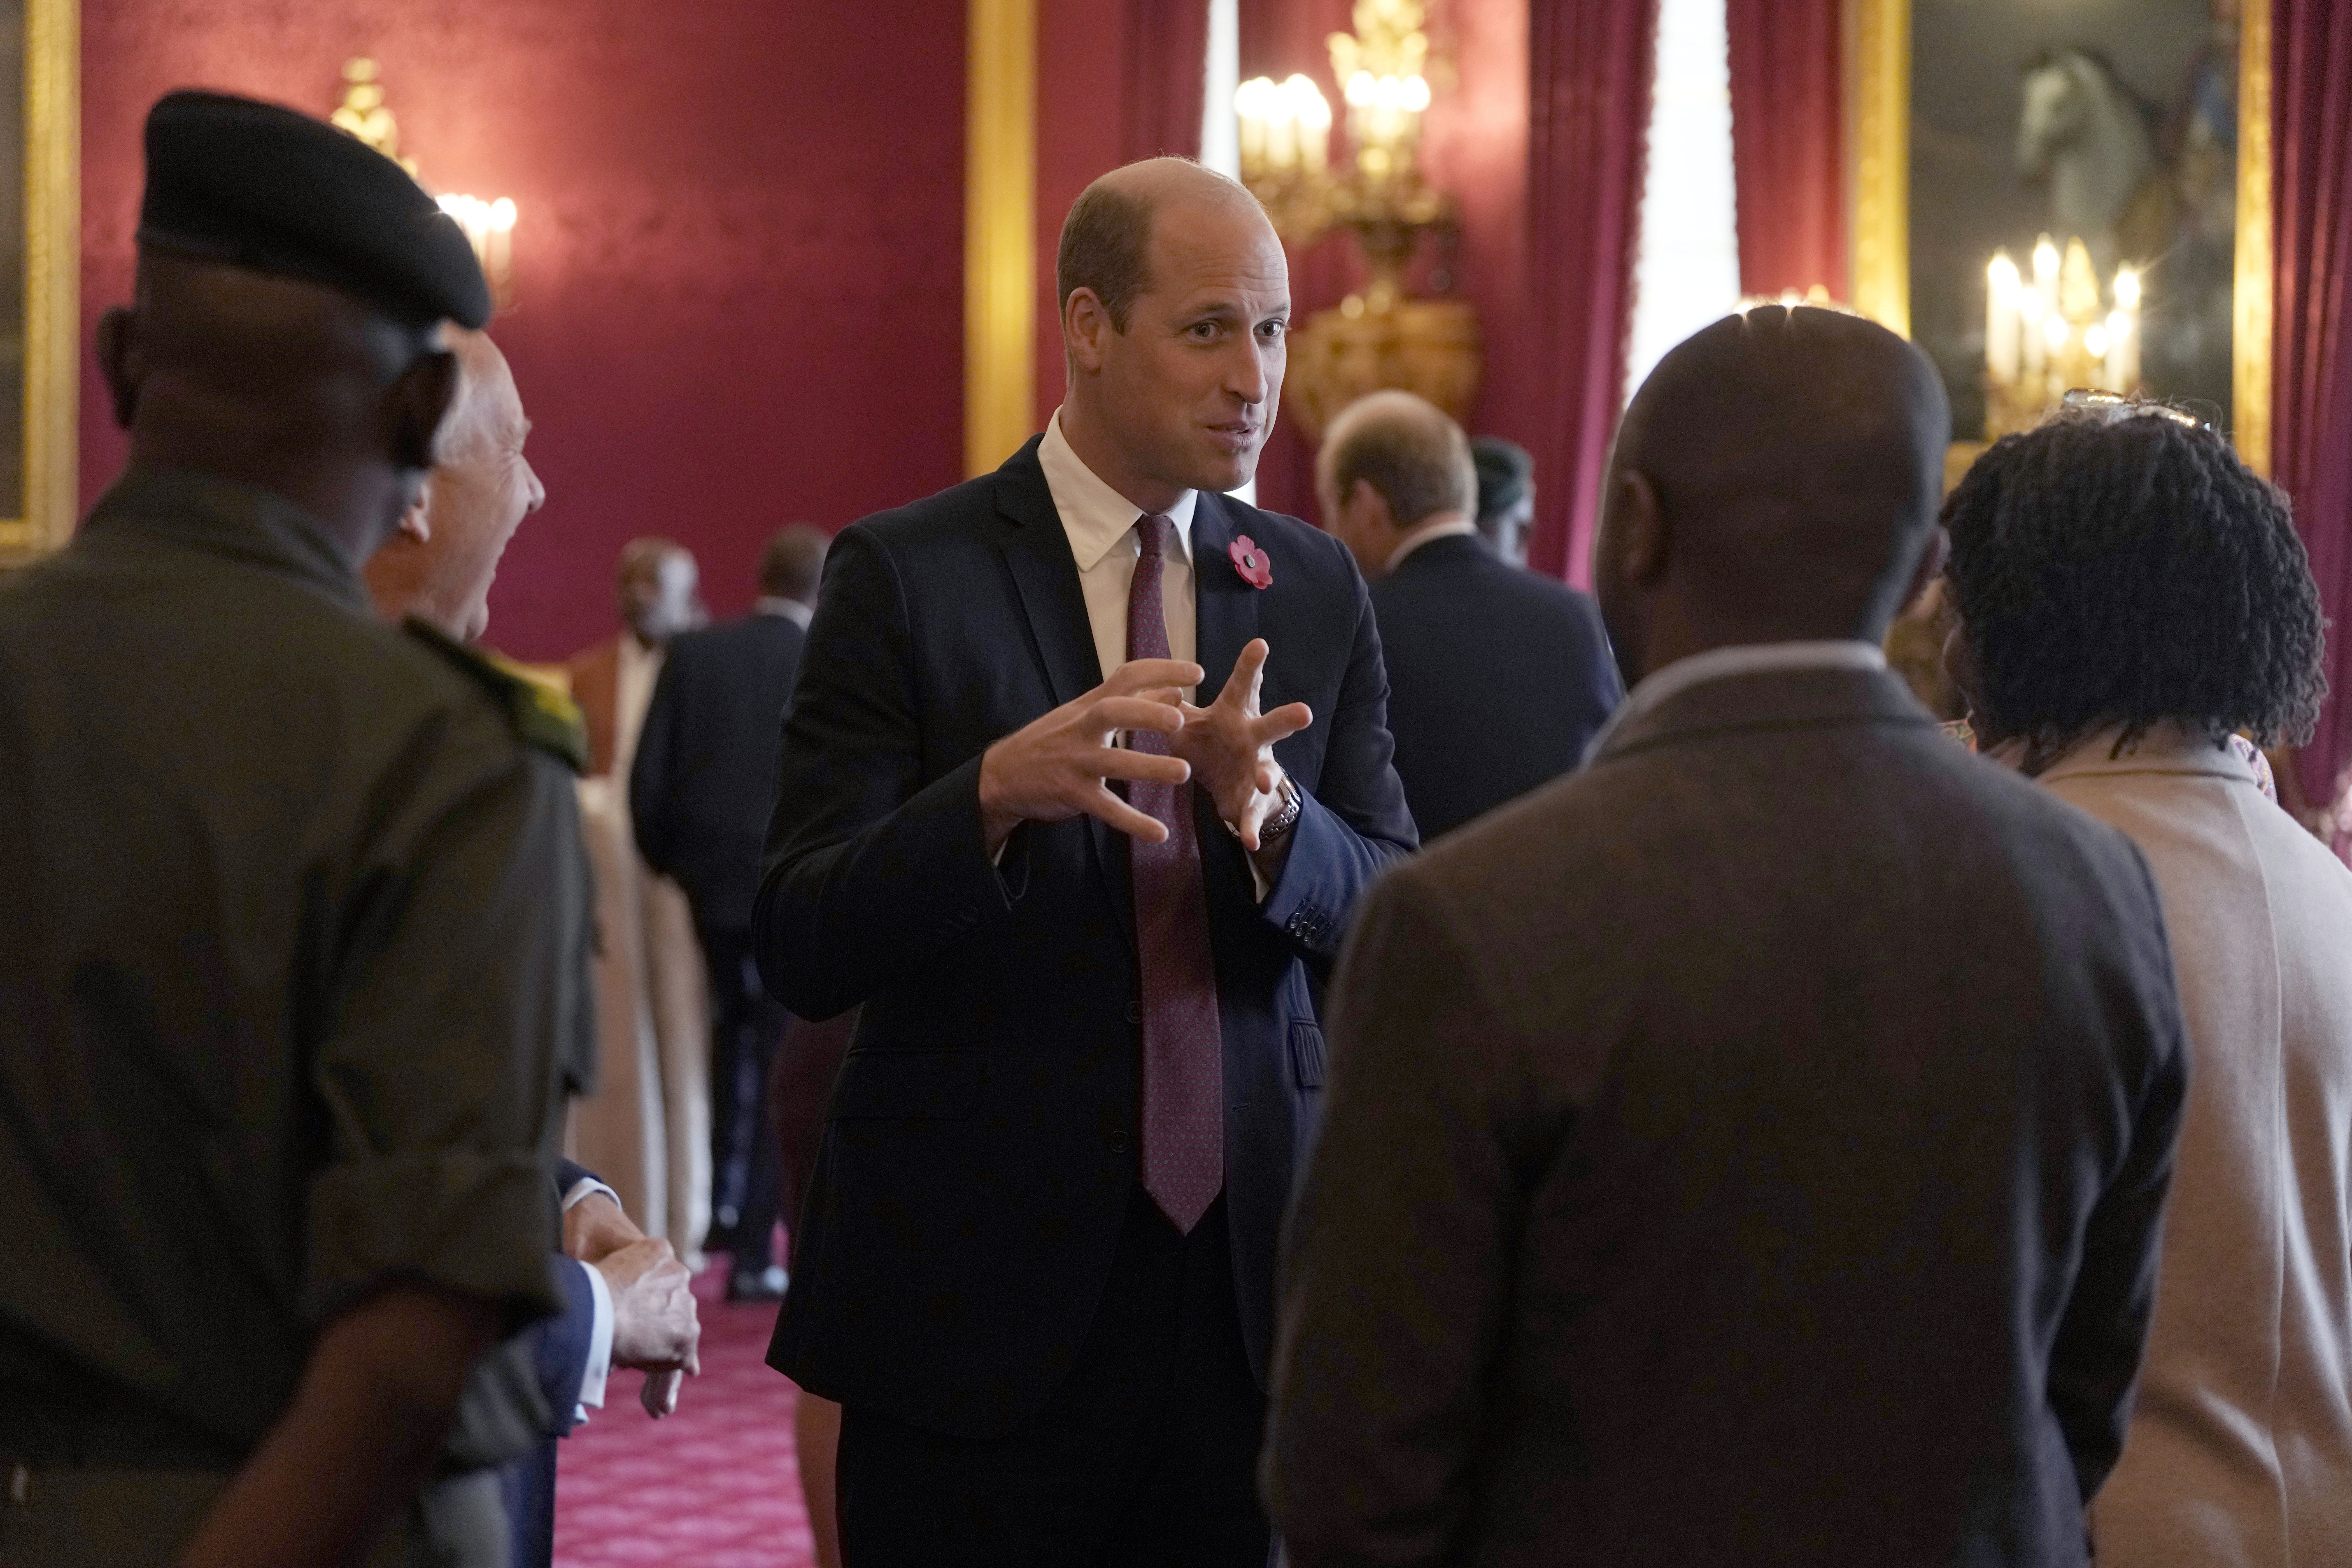 The Prince of Wales speaks with Tusk Conversation Awards winners during a symposium at St James’s Palace (Alastair Grant/PA)